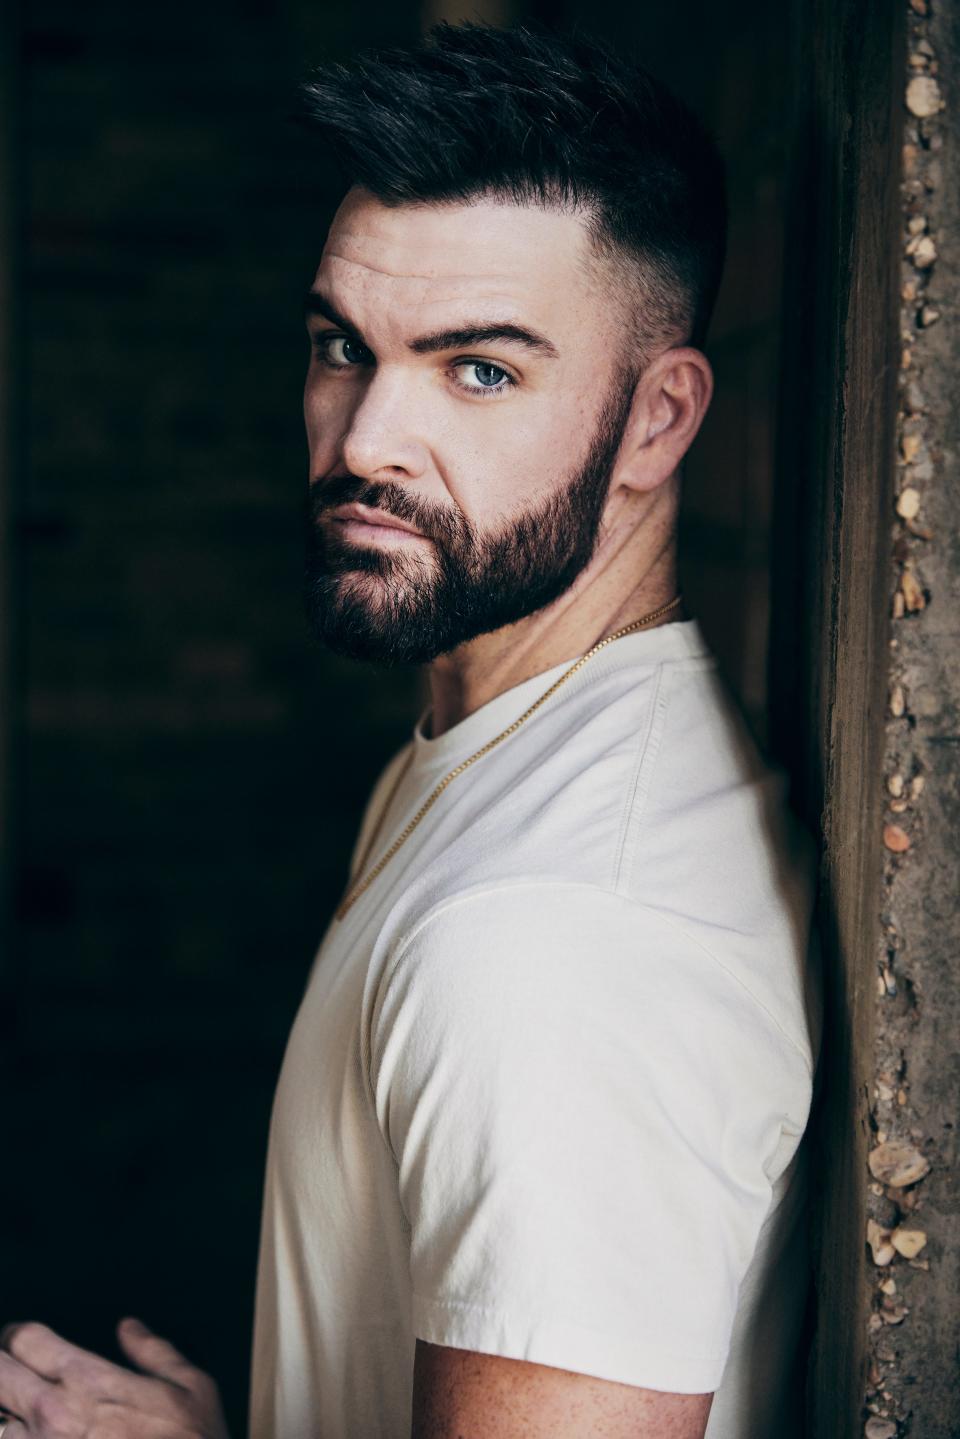 Country music artist Dylan Scott will perform prior to Saturday's USFL championship game at Tom Benson Hall of Fame Stadium in Canton. The 6 p.m. concert will be free at the Fan Engagement Zone with admission to the game.